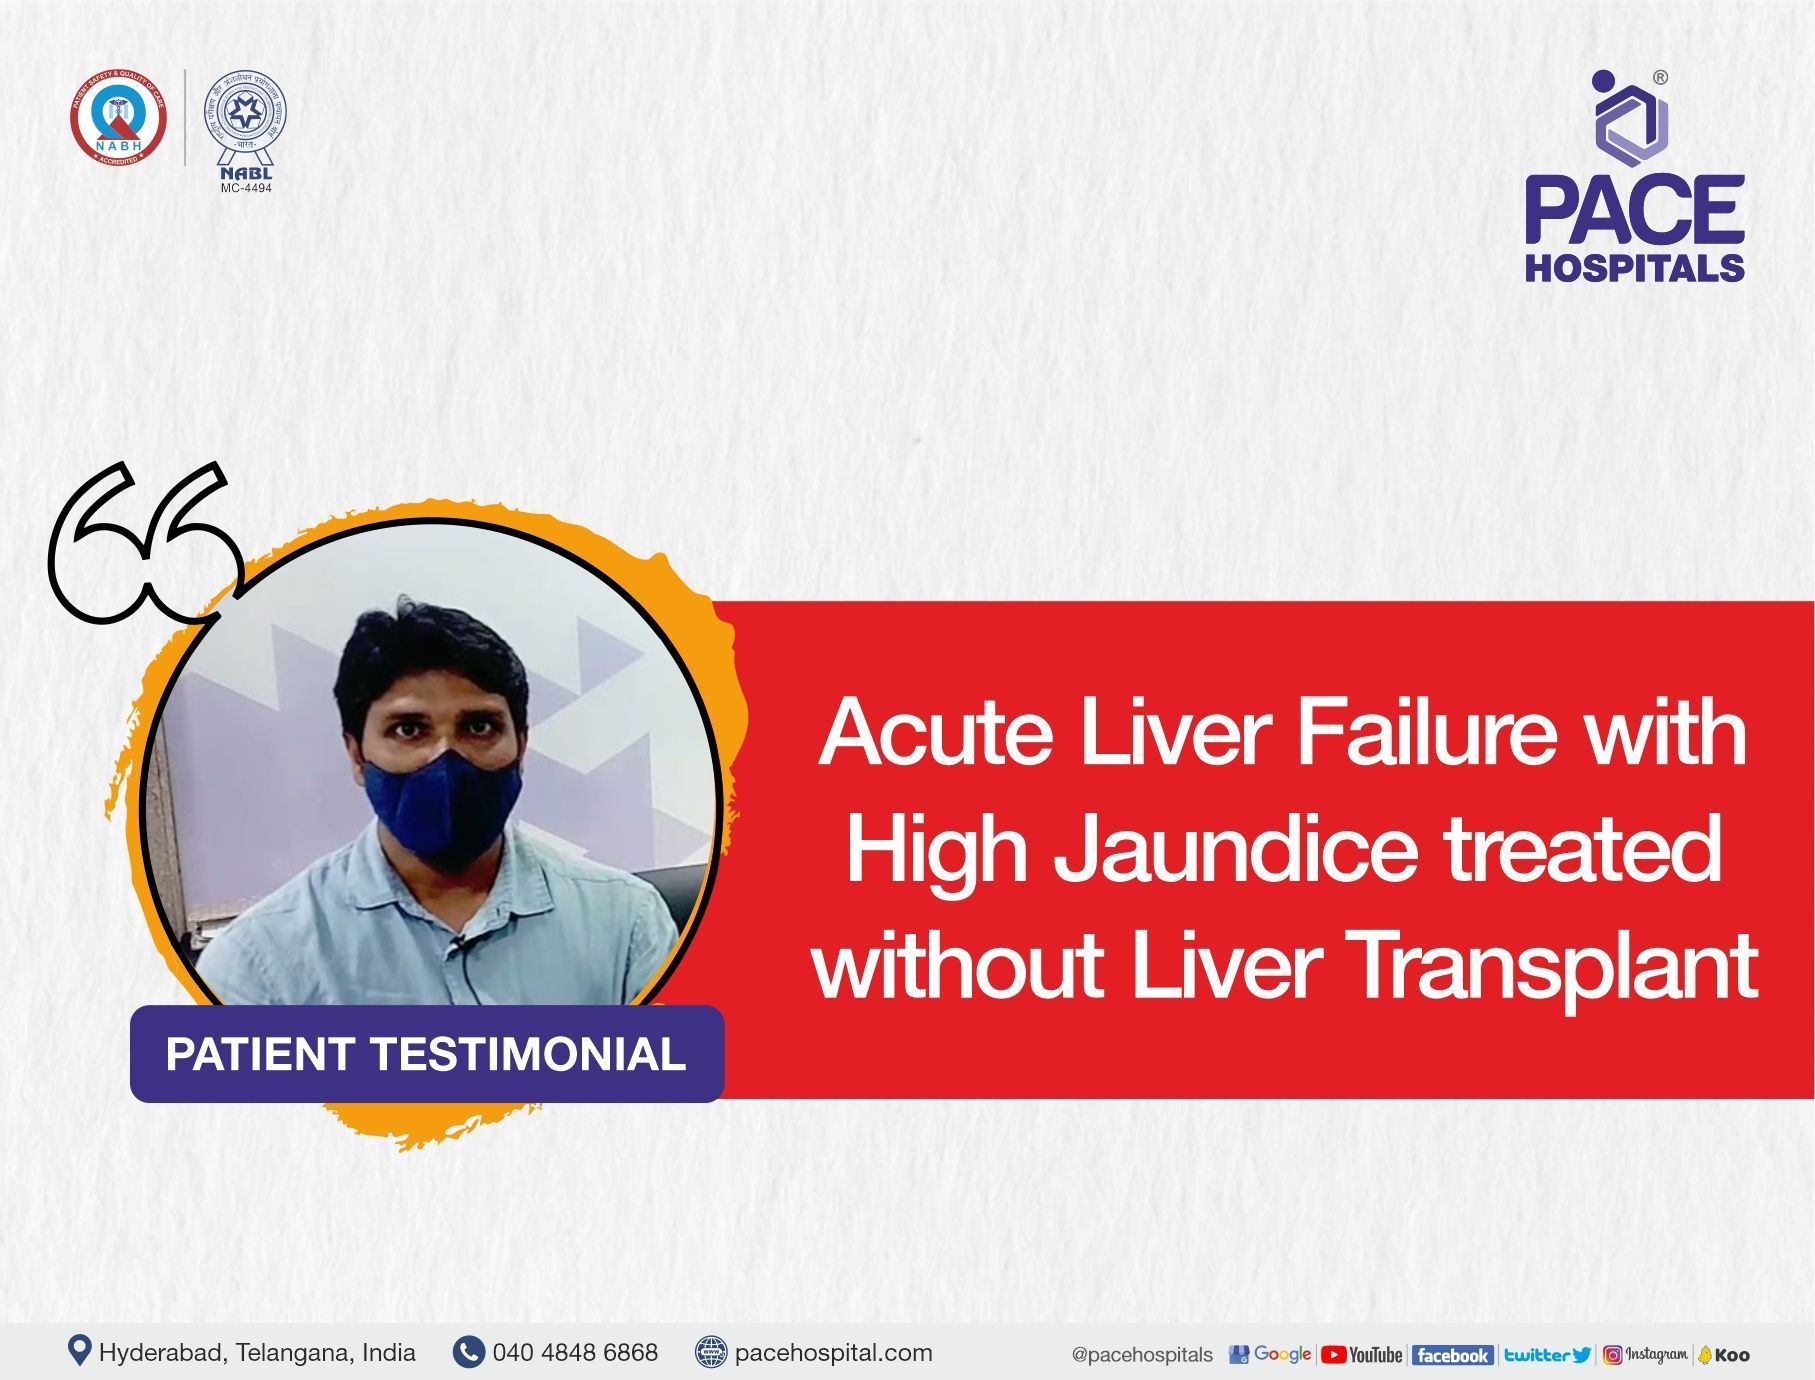 Acute Liver Failure with High Jaundice treated without Liver Transplant